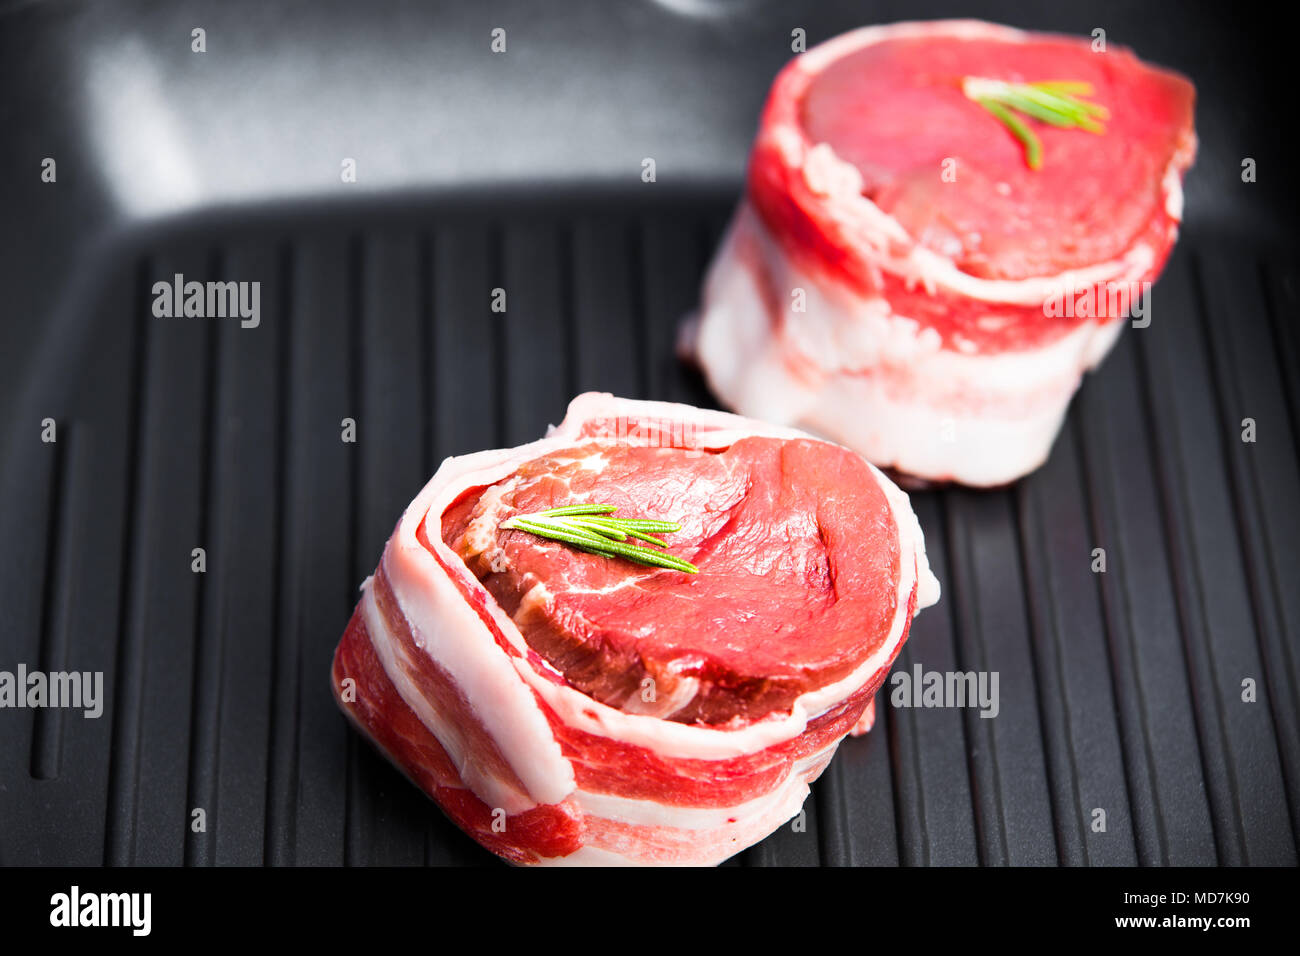 Raw steak fillet mignon in a grilled pan close-up with a sprig of rosemary. Theme of tasty and healthy food. Stock Photo